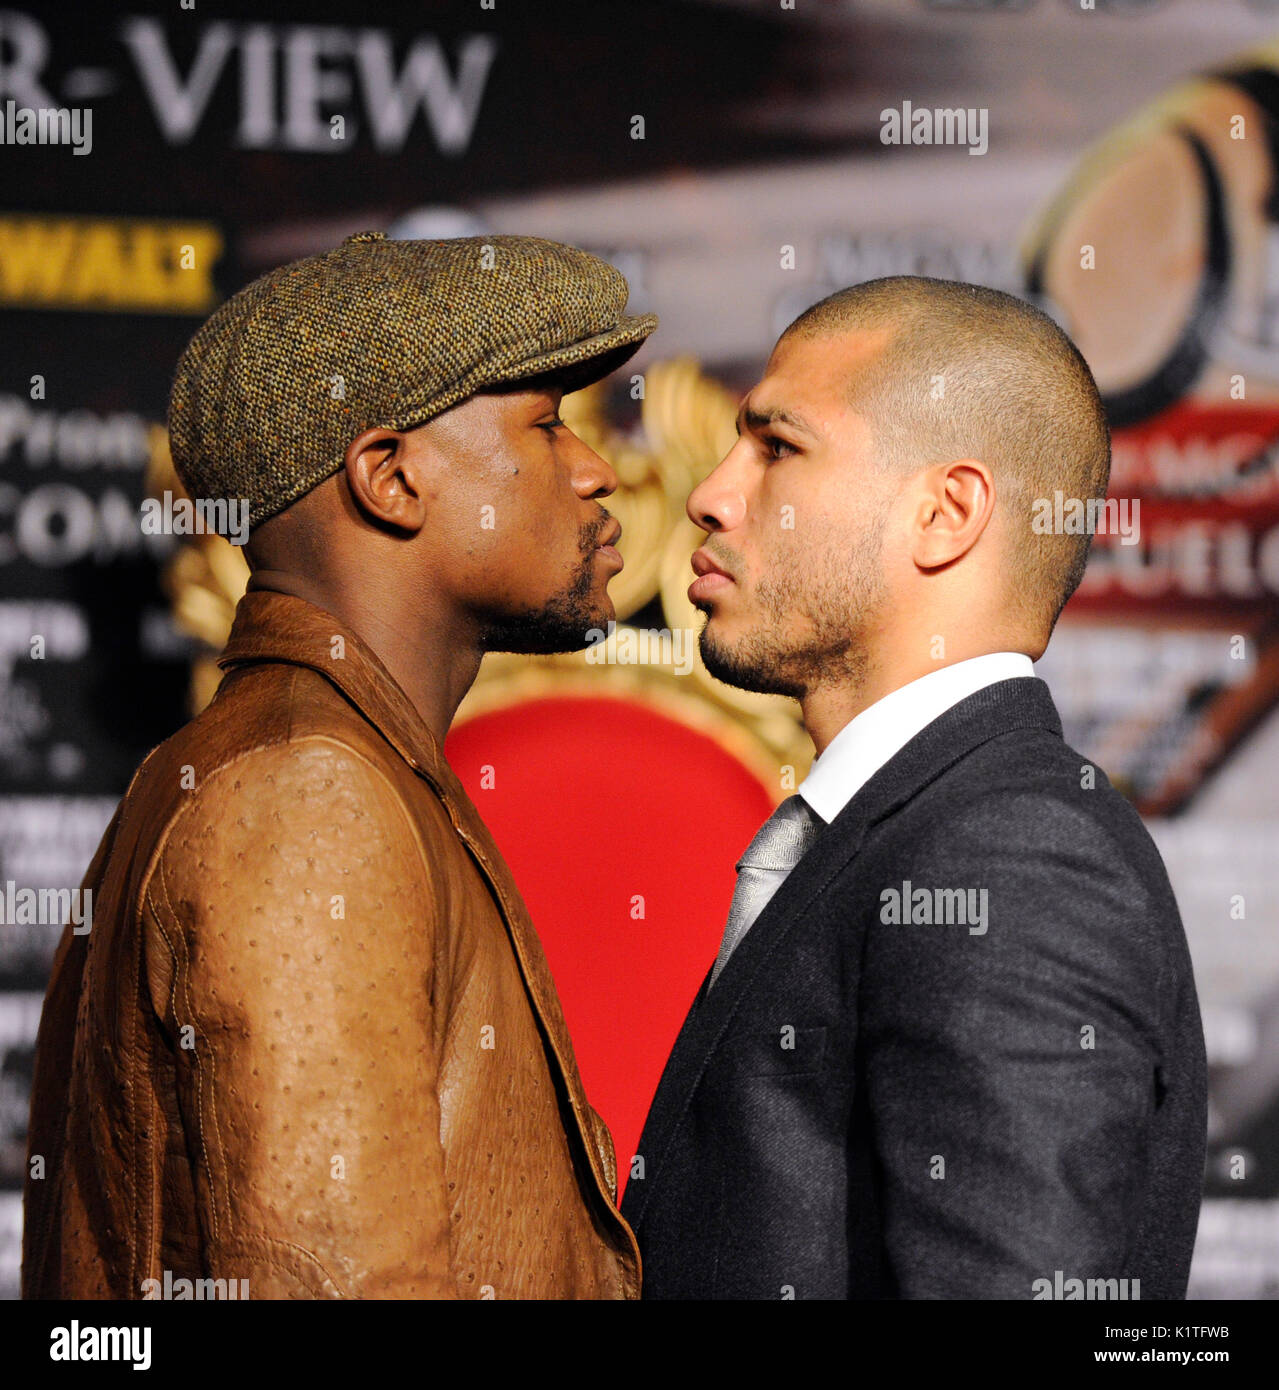 US Boxer Floyd Mayweather (L) WBA Super Welterweight World Champion Miguel Cotto Puerto Rico Faceoff durante la conferenza stampa Grauman's Chinese Theatre Hollywood marzo 1,2012. Mayweather cotto incontrerà WBA Super Welterweight World Championship Fight 5 maggio MGM Grand Las Vegas. Foto Stock